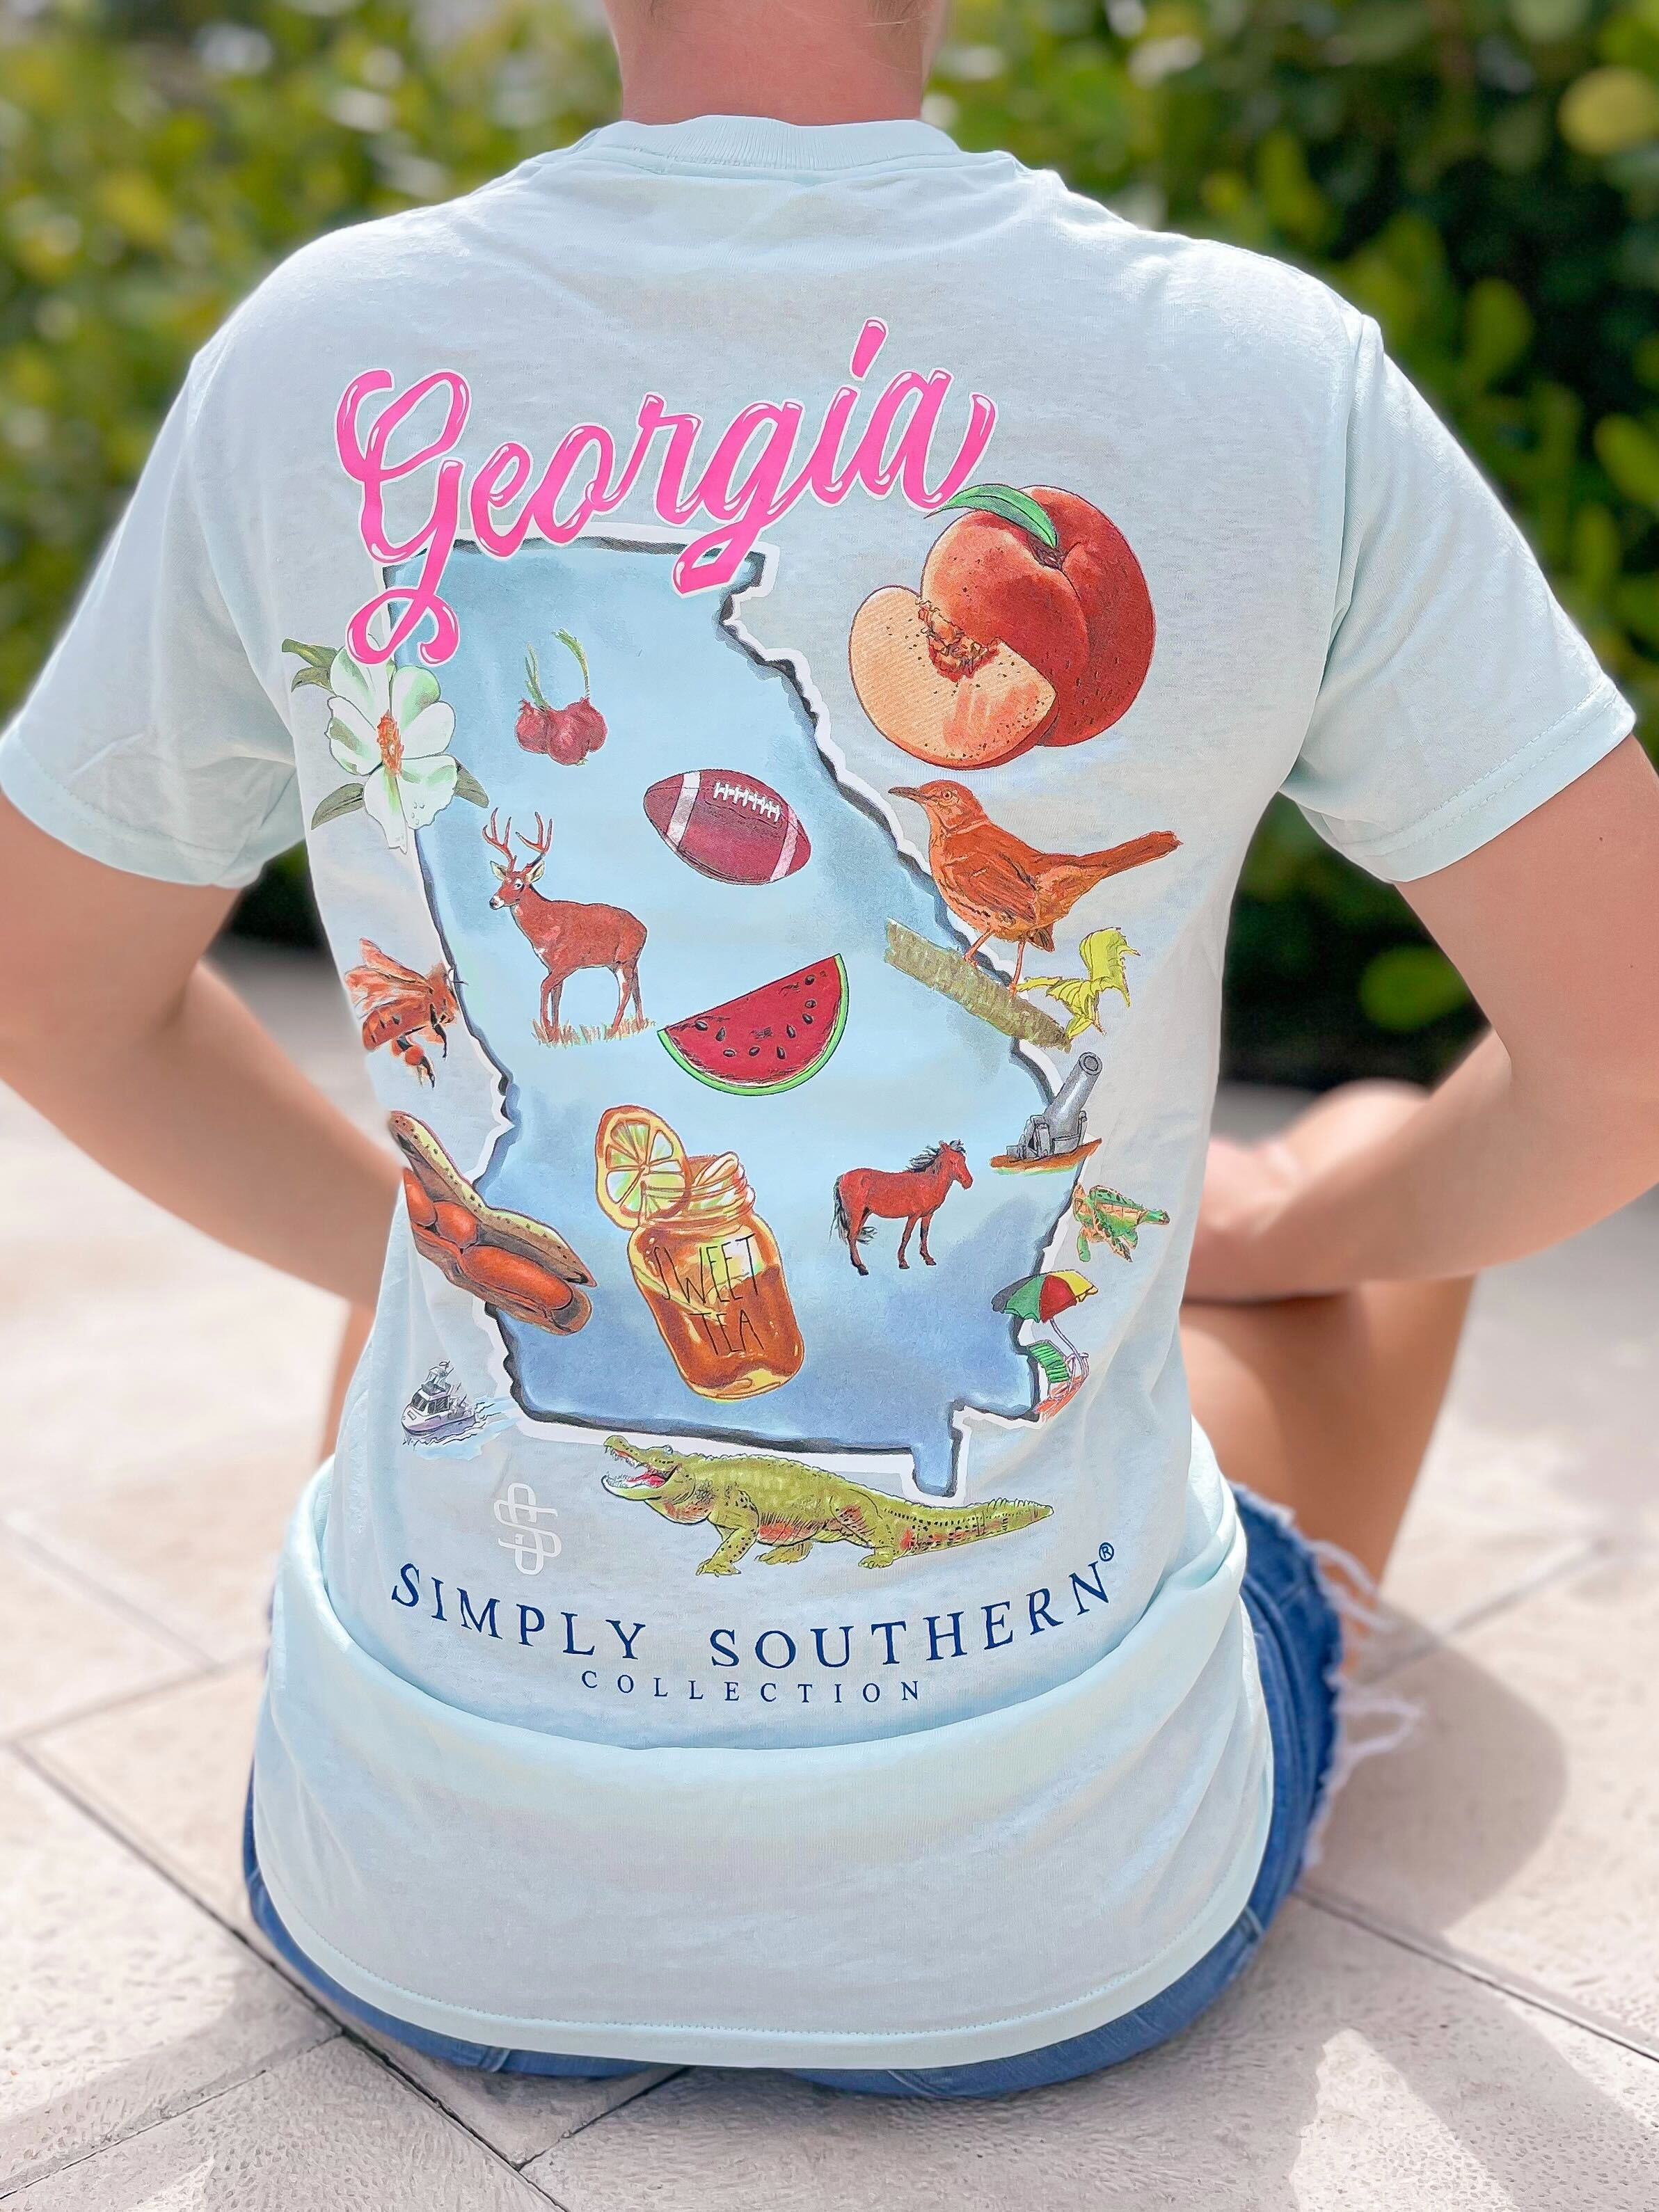 Georgia State Short Sleeve Tee by Simply Southern